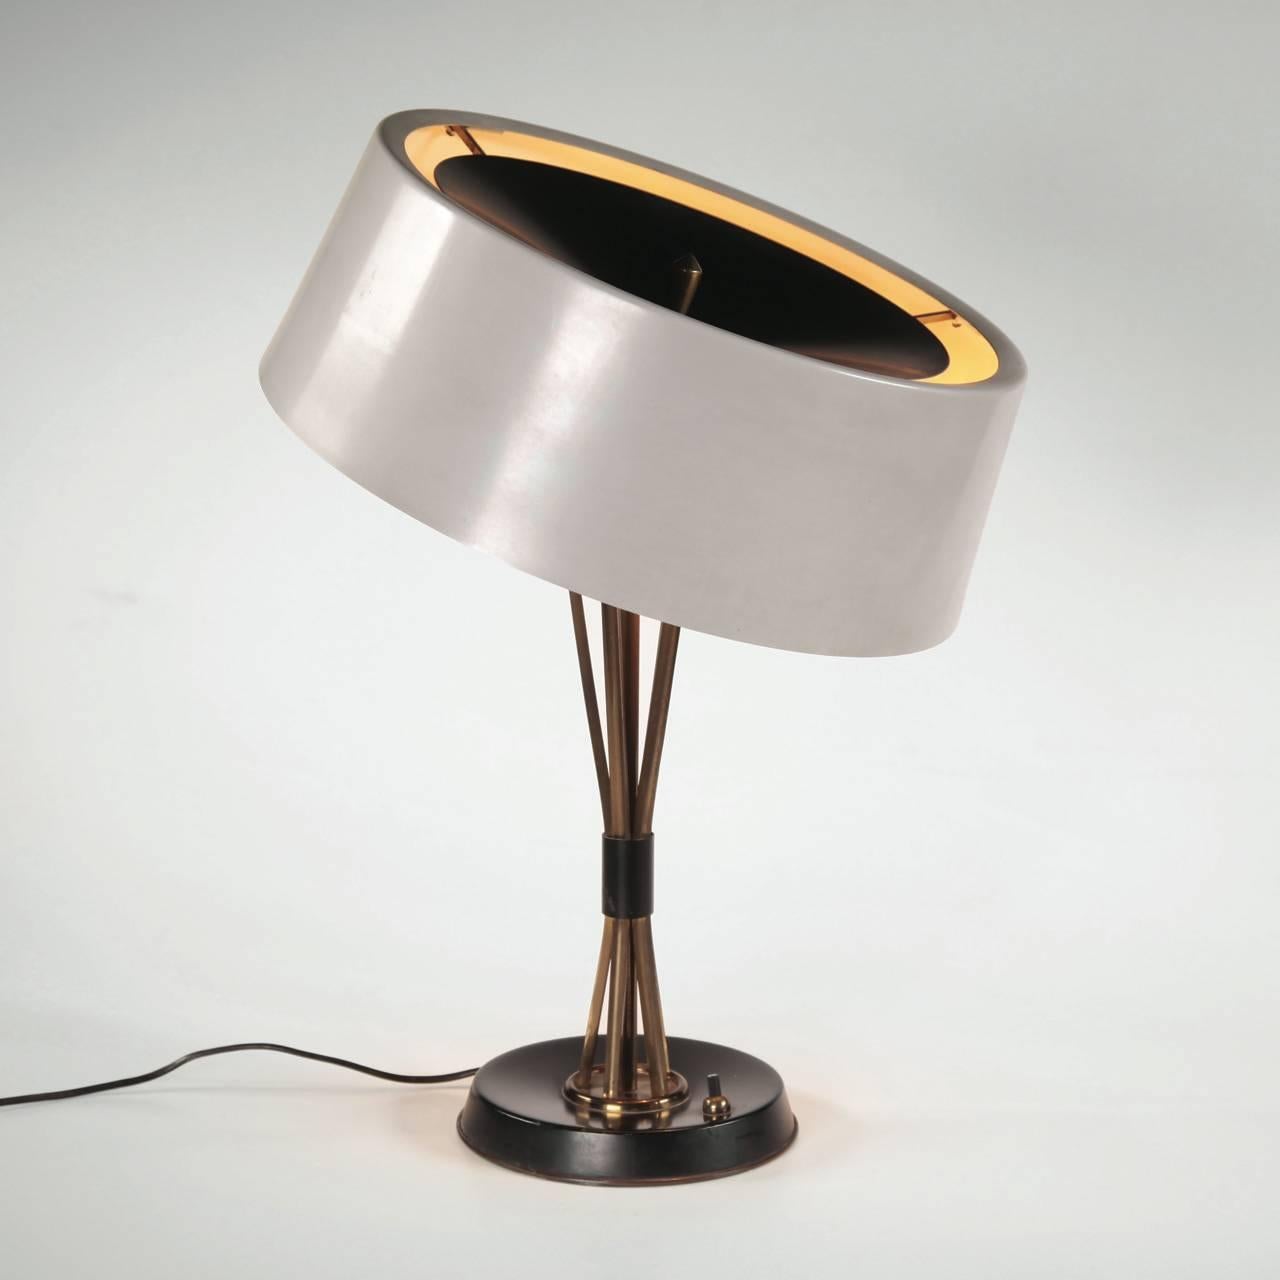 Elegant table lamp in brass with lampshade in varnished metal designed by Oscar Torlasco and produced by Lumi, Italia, circa 1950.